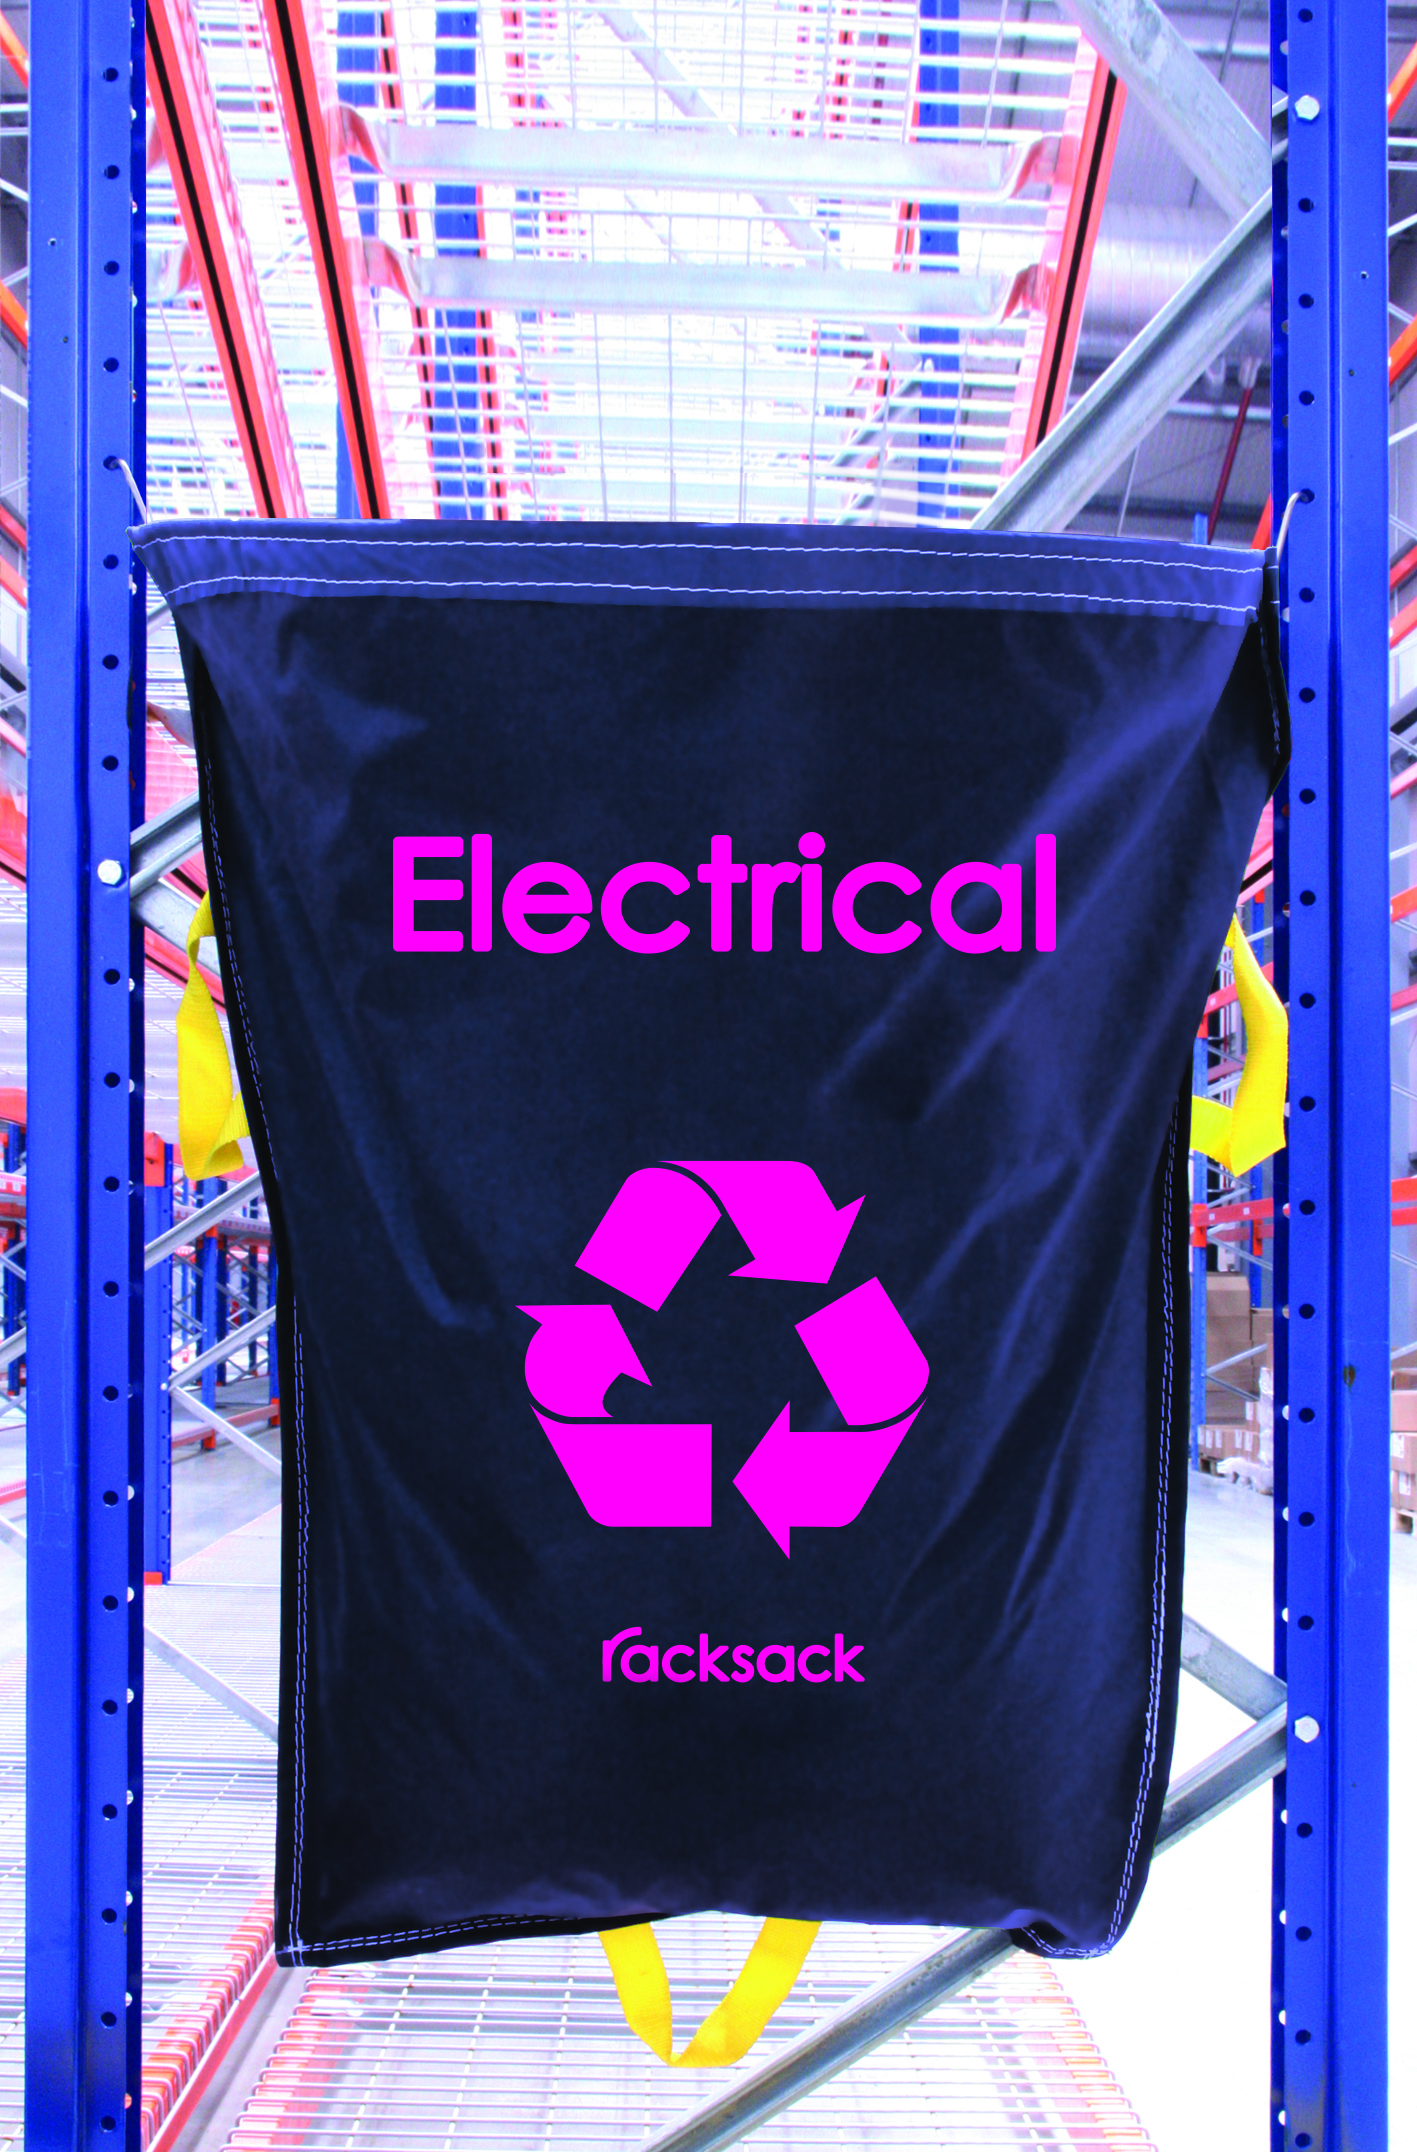 Plastic Only White Recycling Sack Printed Red pk = 1 Racksack 920mm wide x 800mm high x 400mm deep 